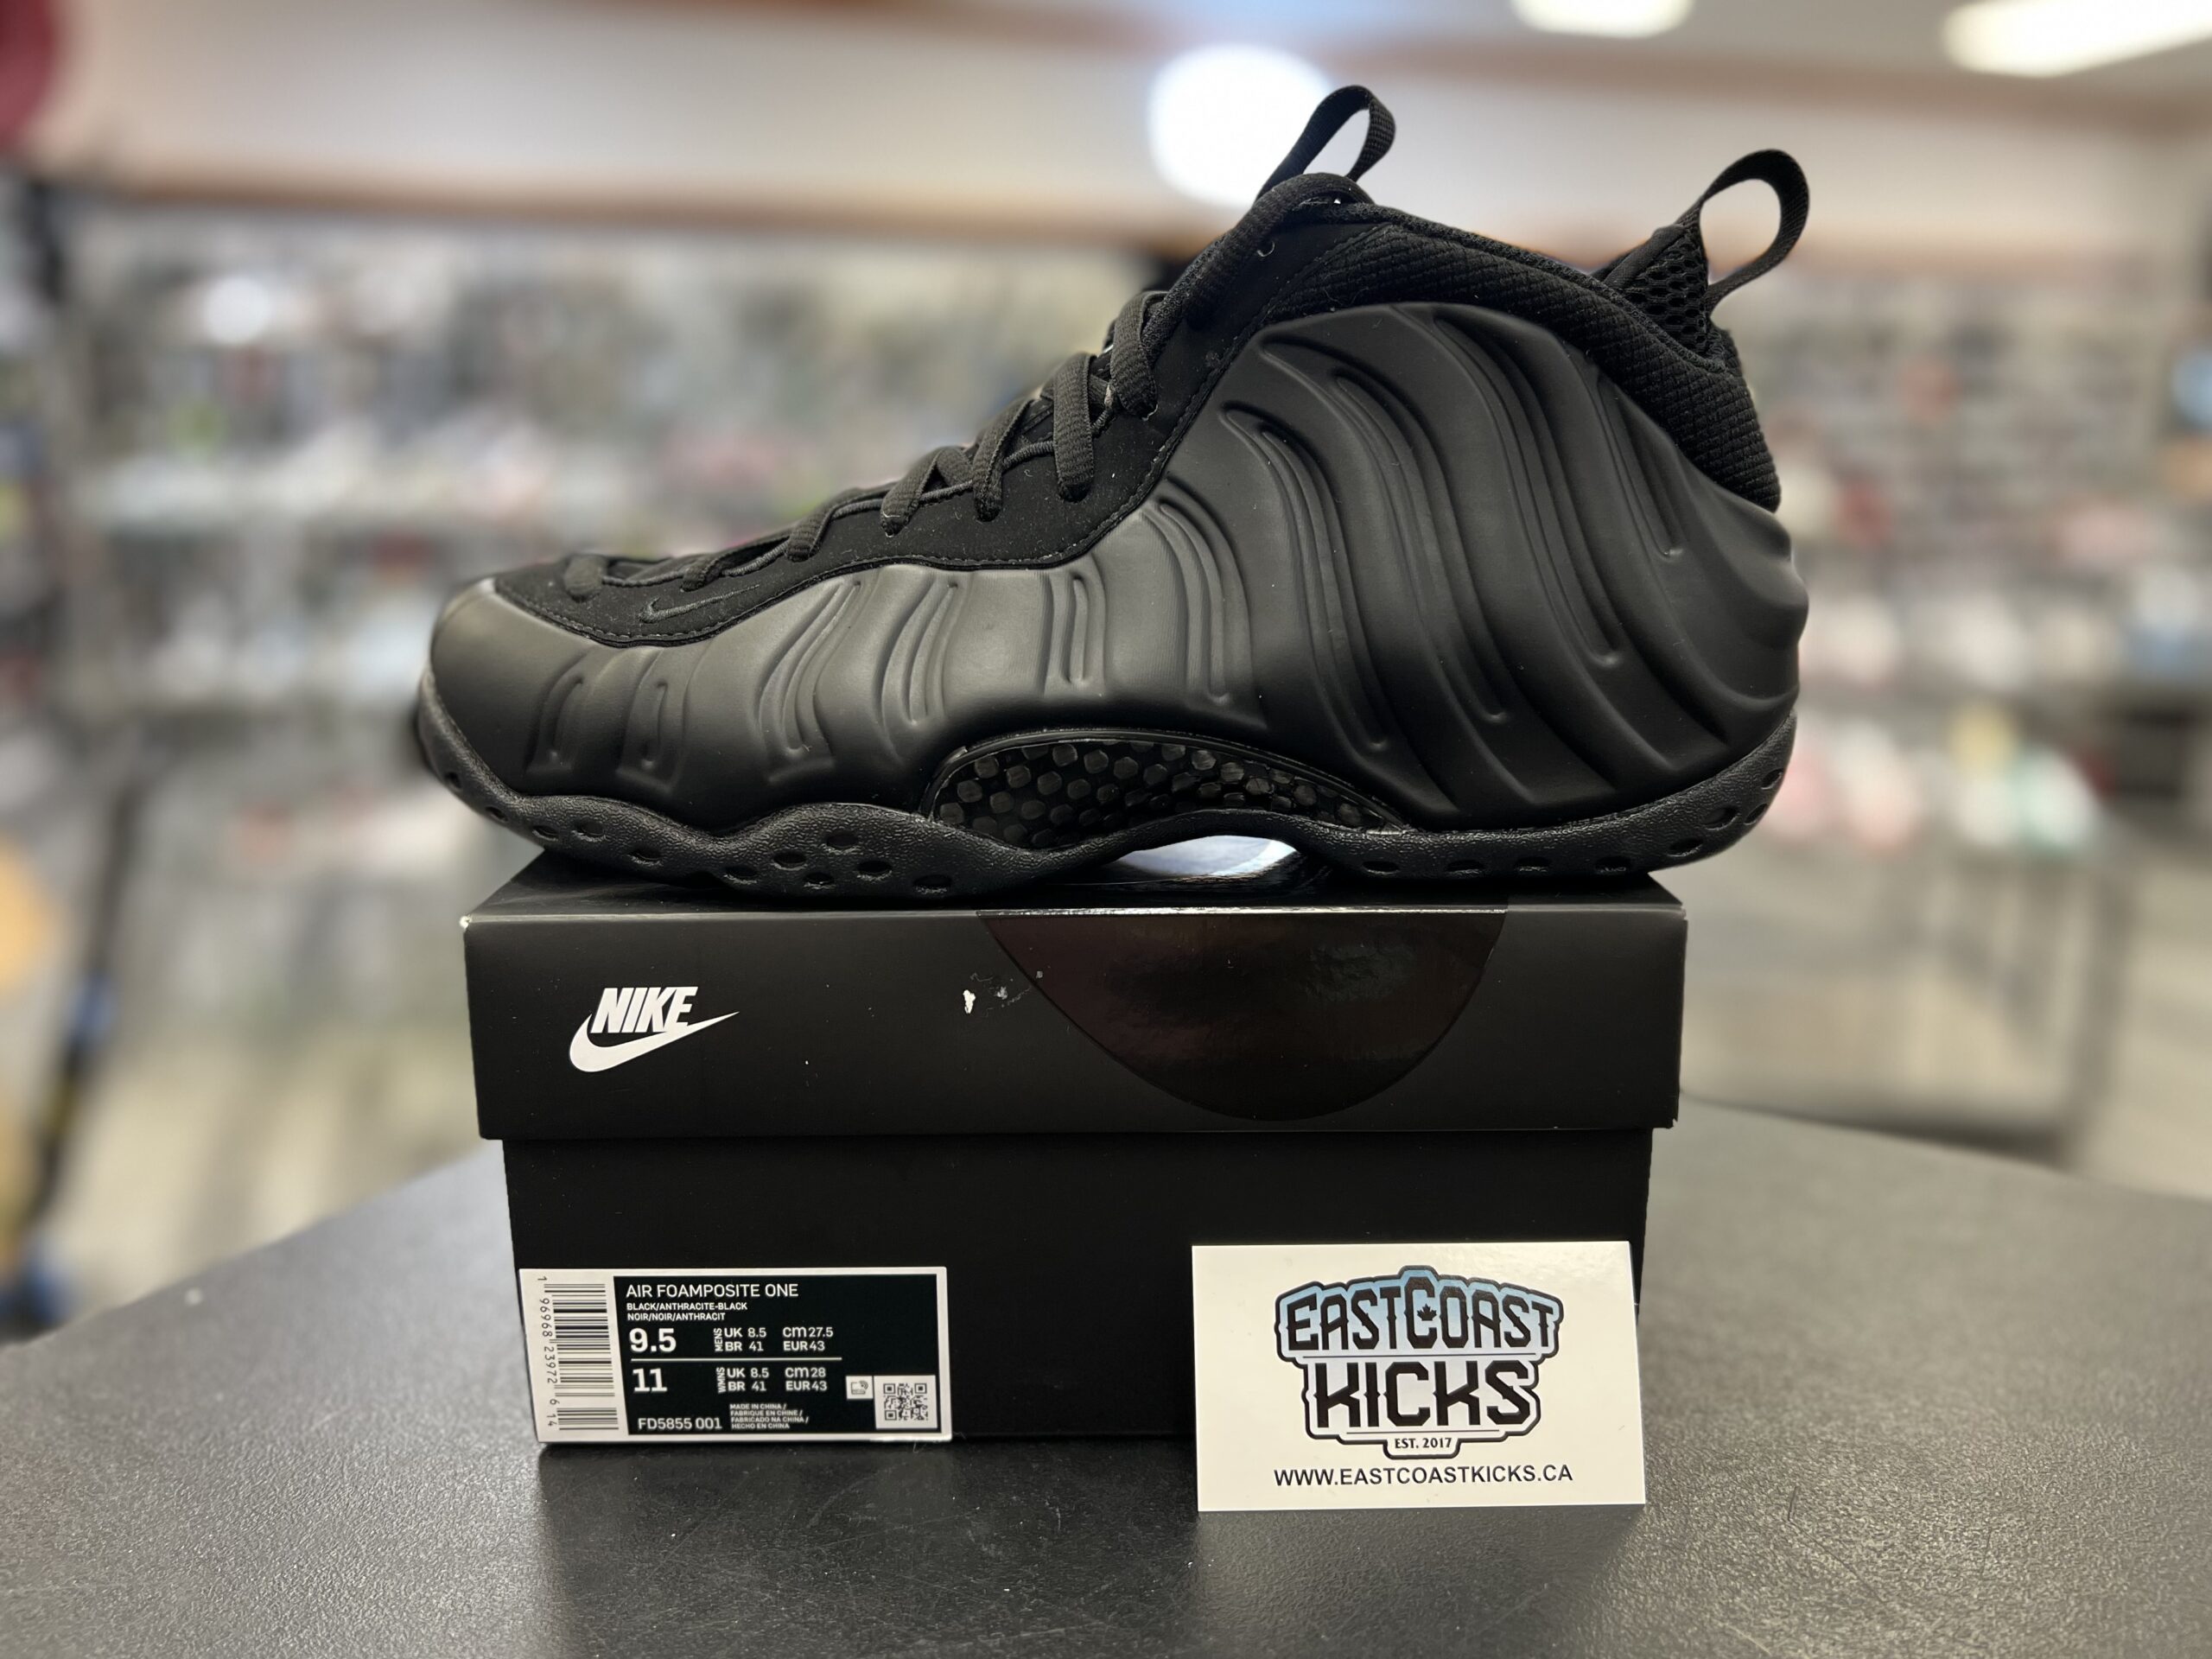 Nike Air Foamposite One Anthracite Size 9.5